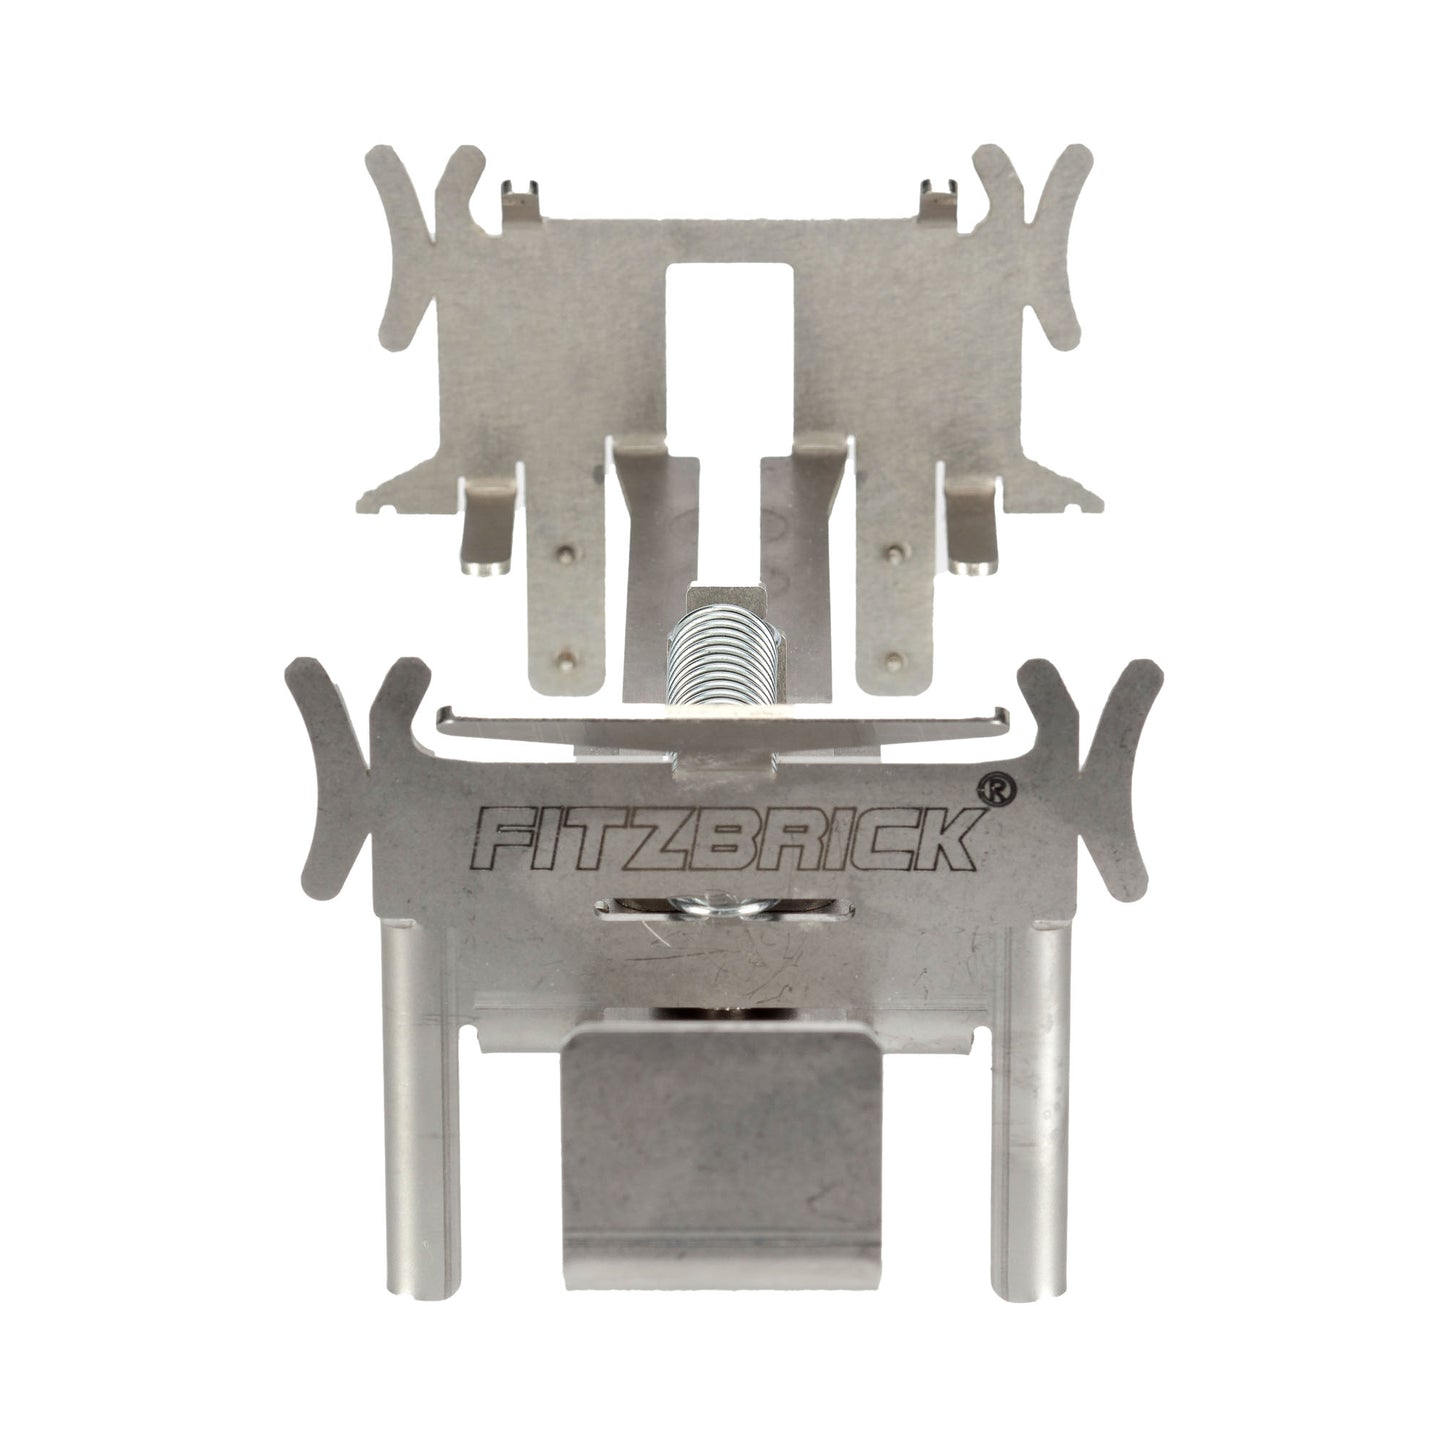 FitzBrick Penny Clamp TM (Single) - EXTENDS TO 237MM